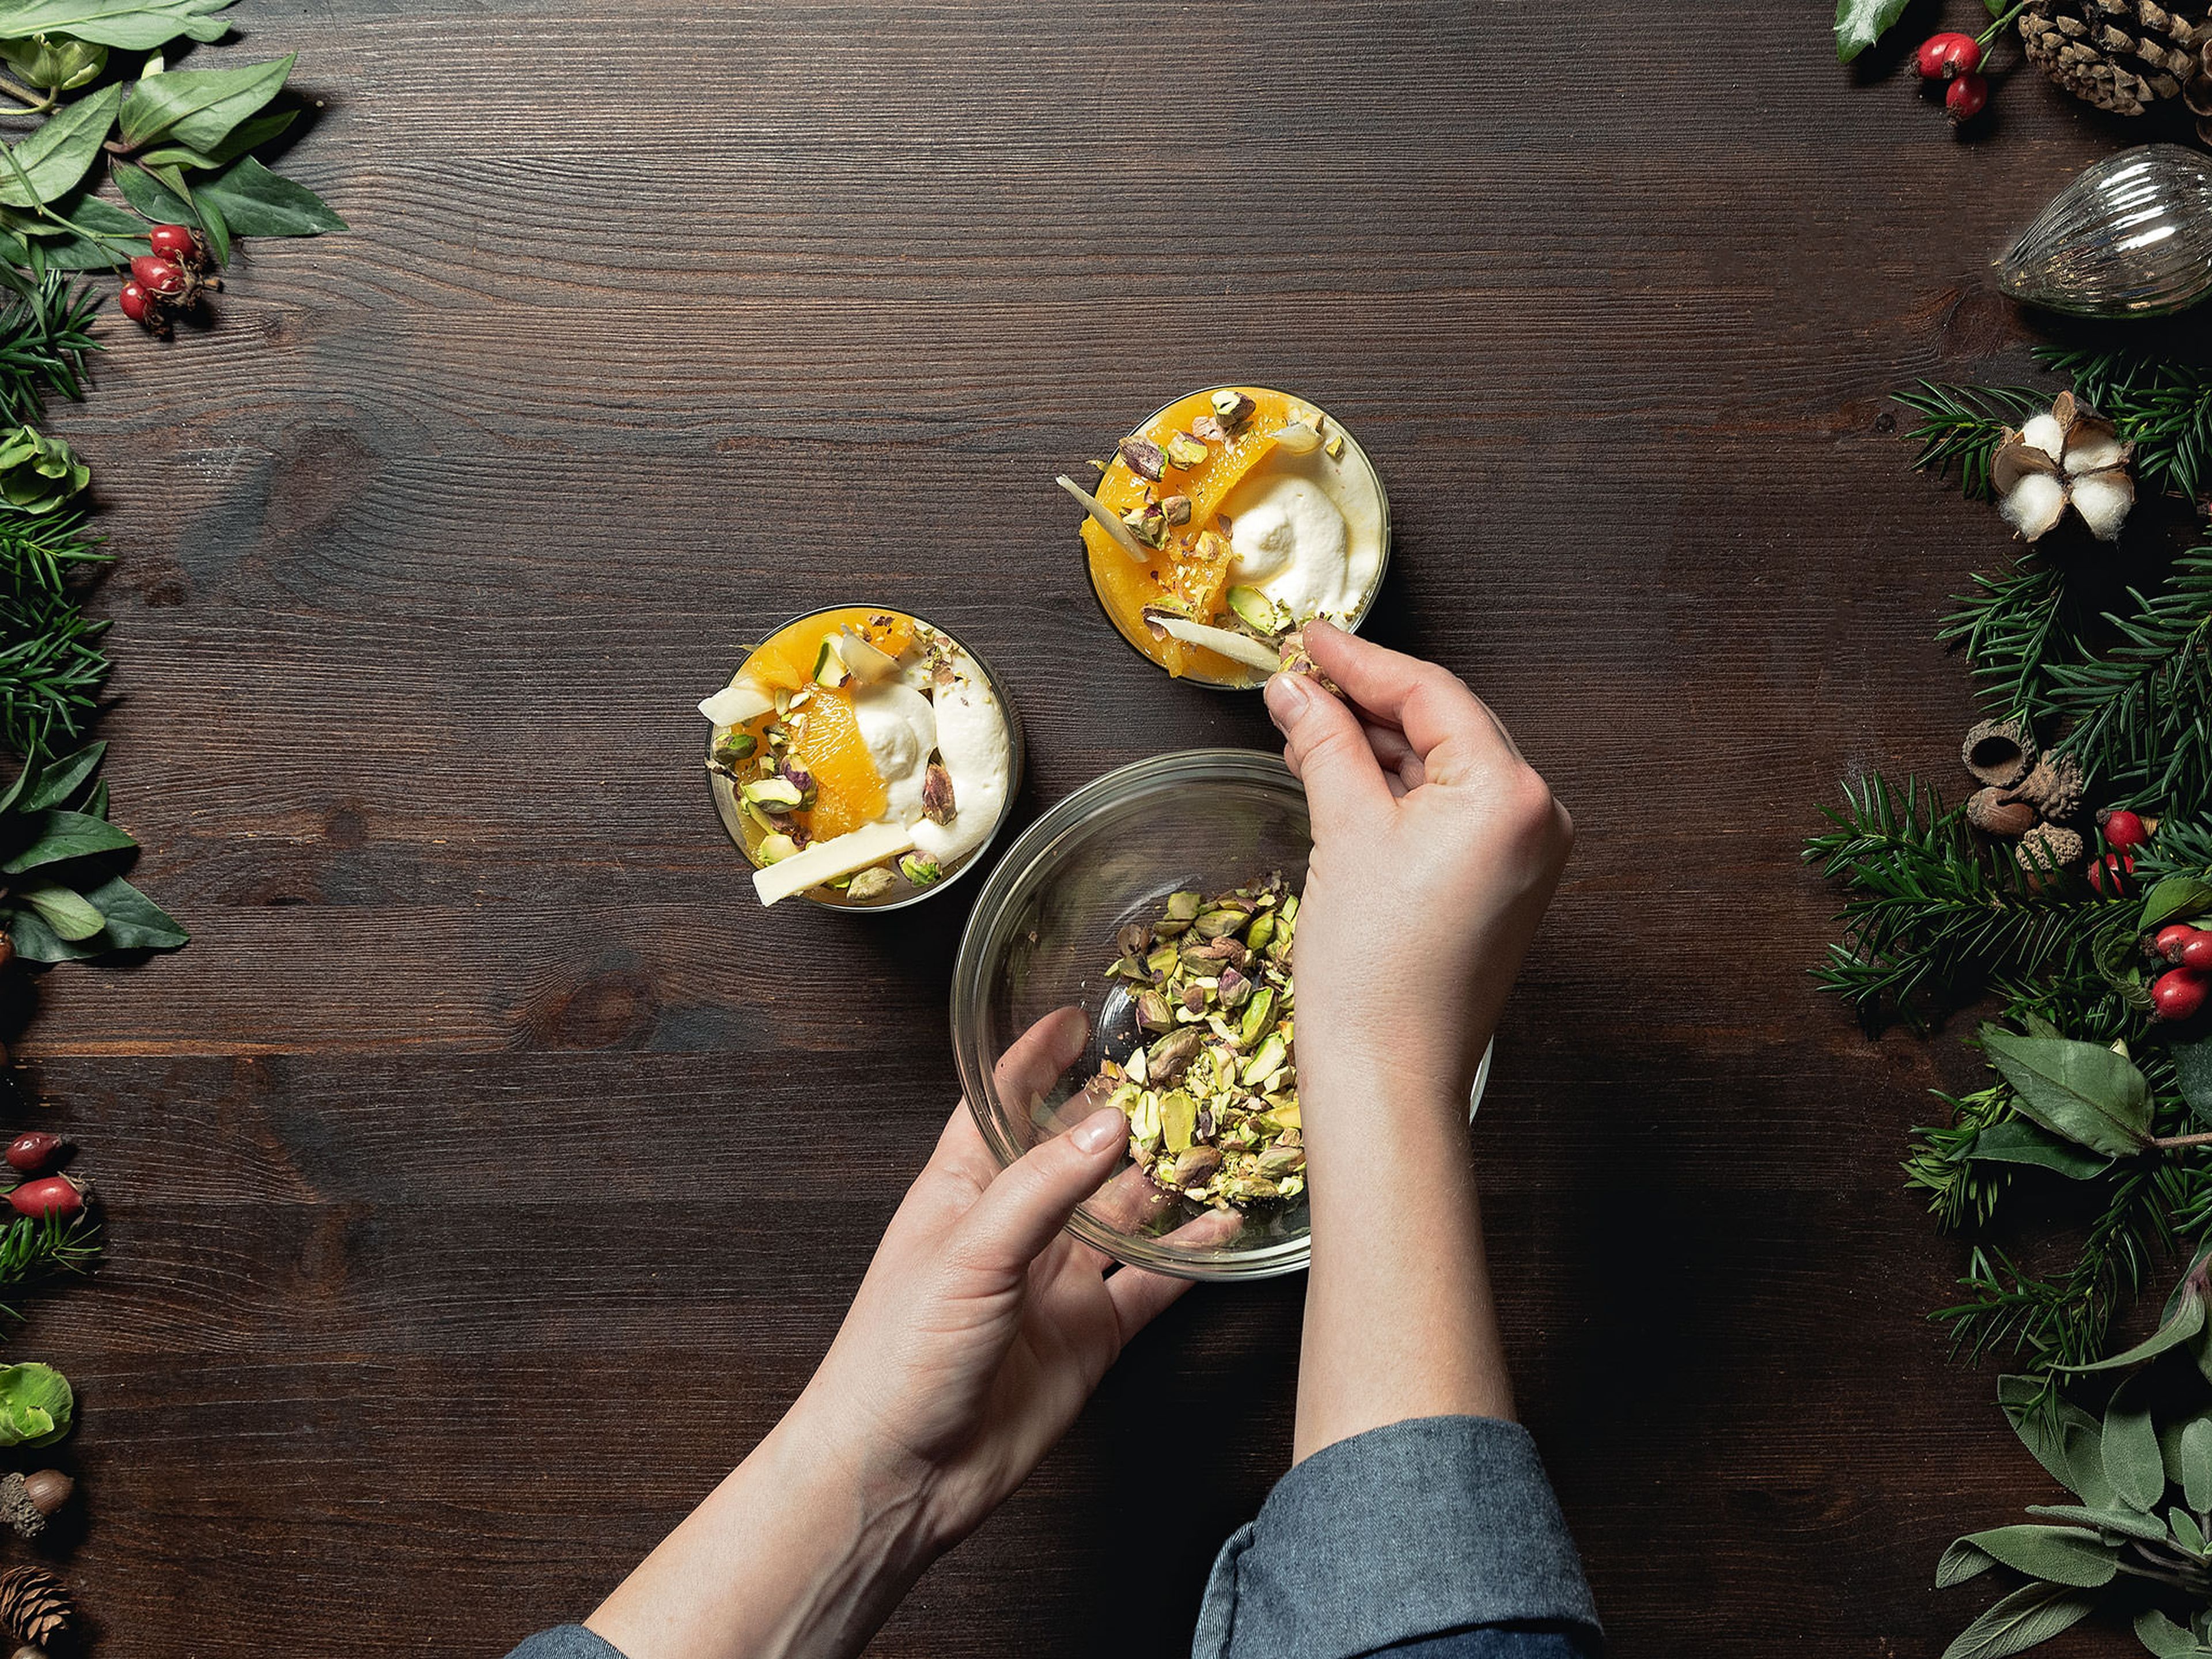 Layer yogurt-white chocolate cream, oranges, and chopped pistachios in serving glasses. Garnish with white chocolate shavings and enjoy!